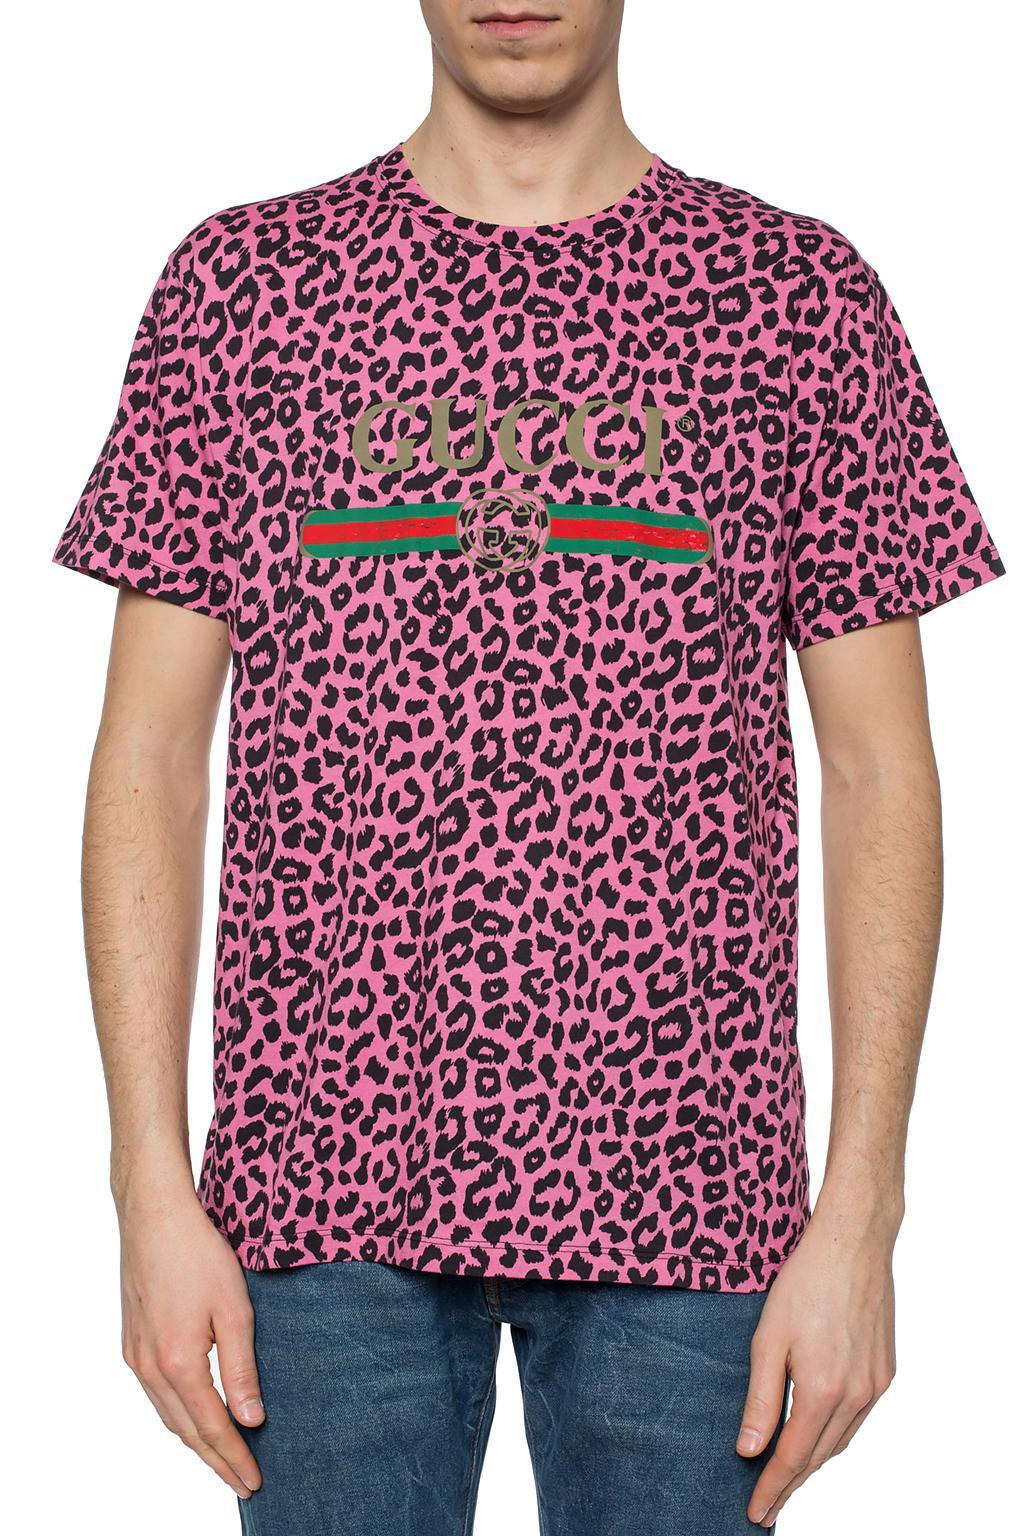 Gucci Cotton Oversize T-shirt With Logo in Pink for Men - Lyst